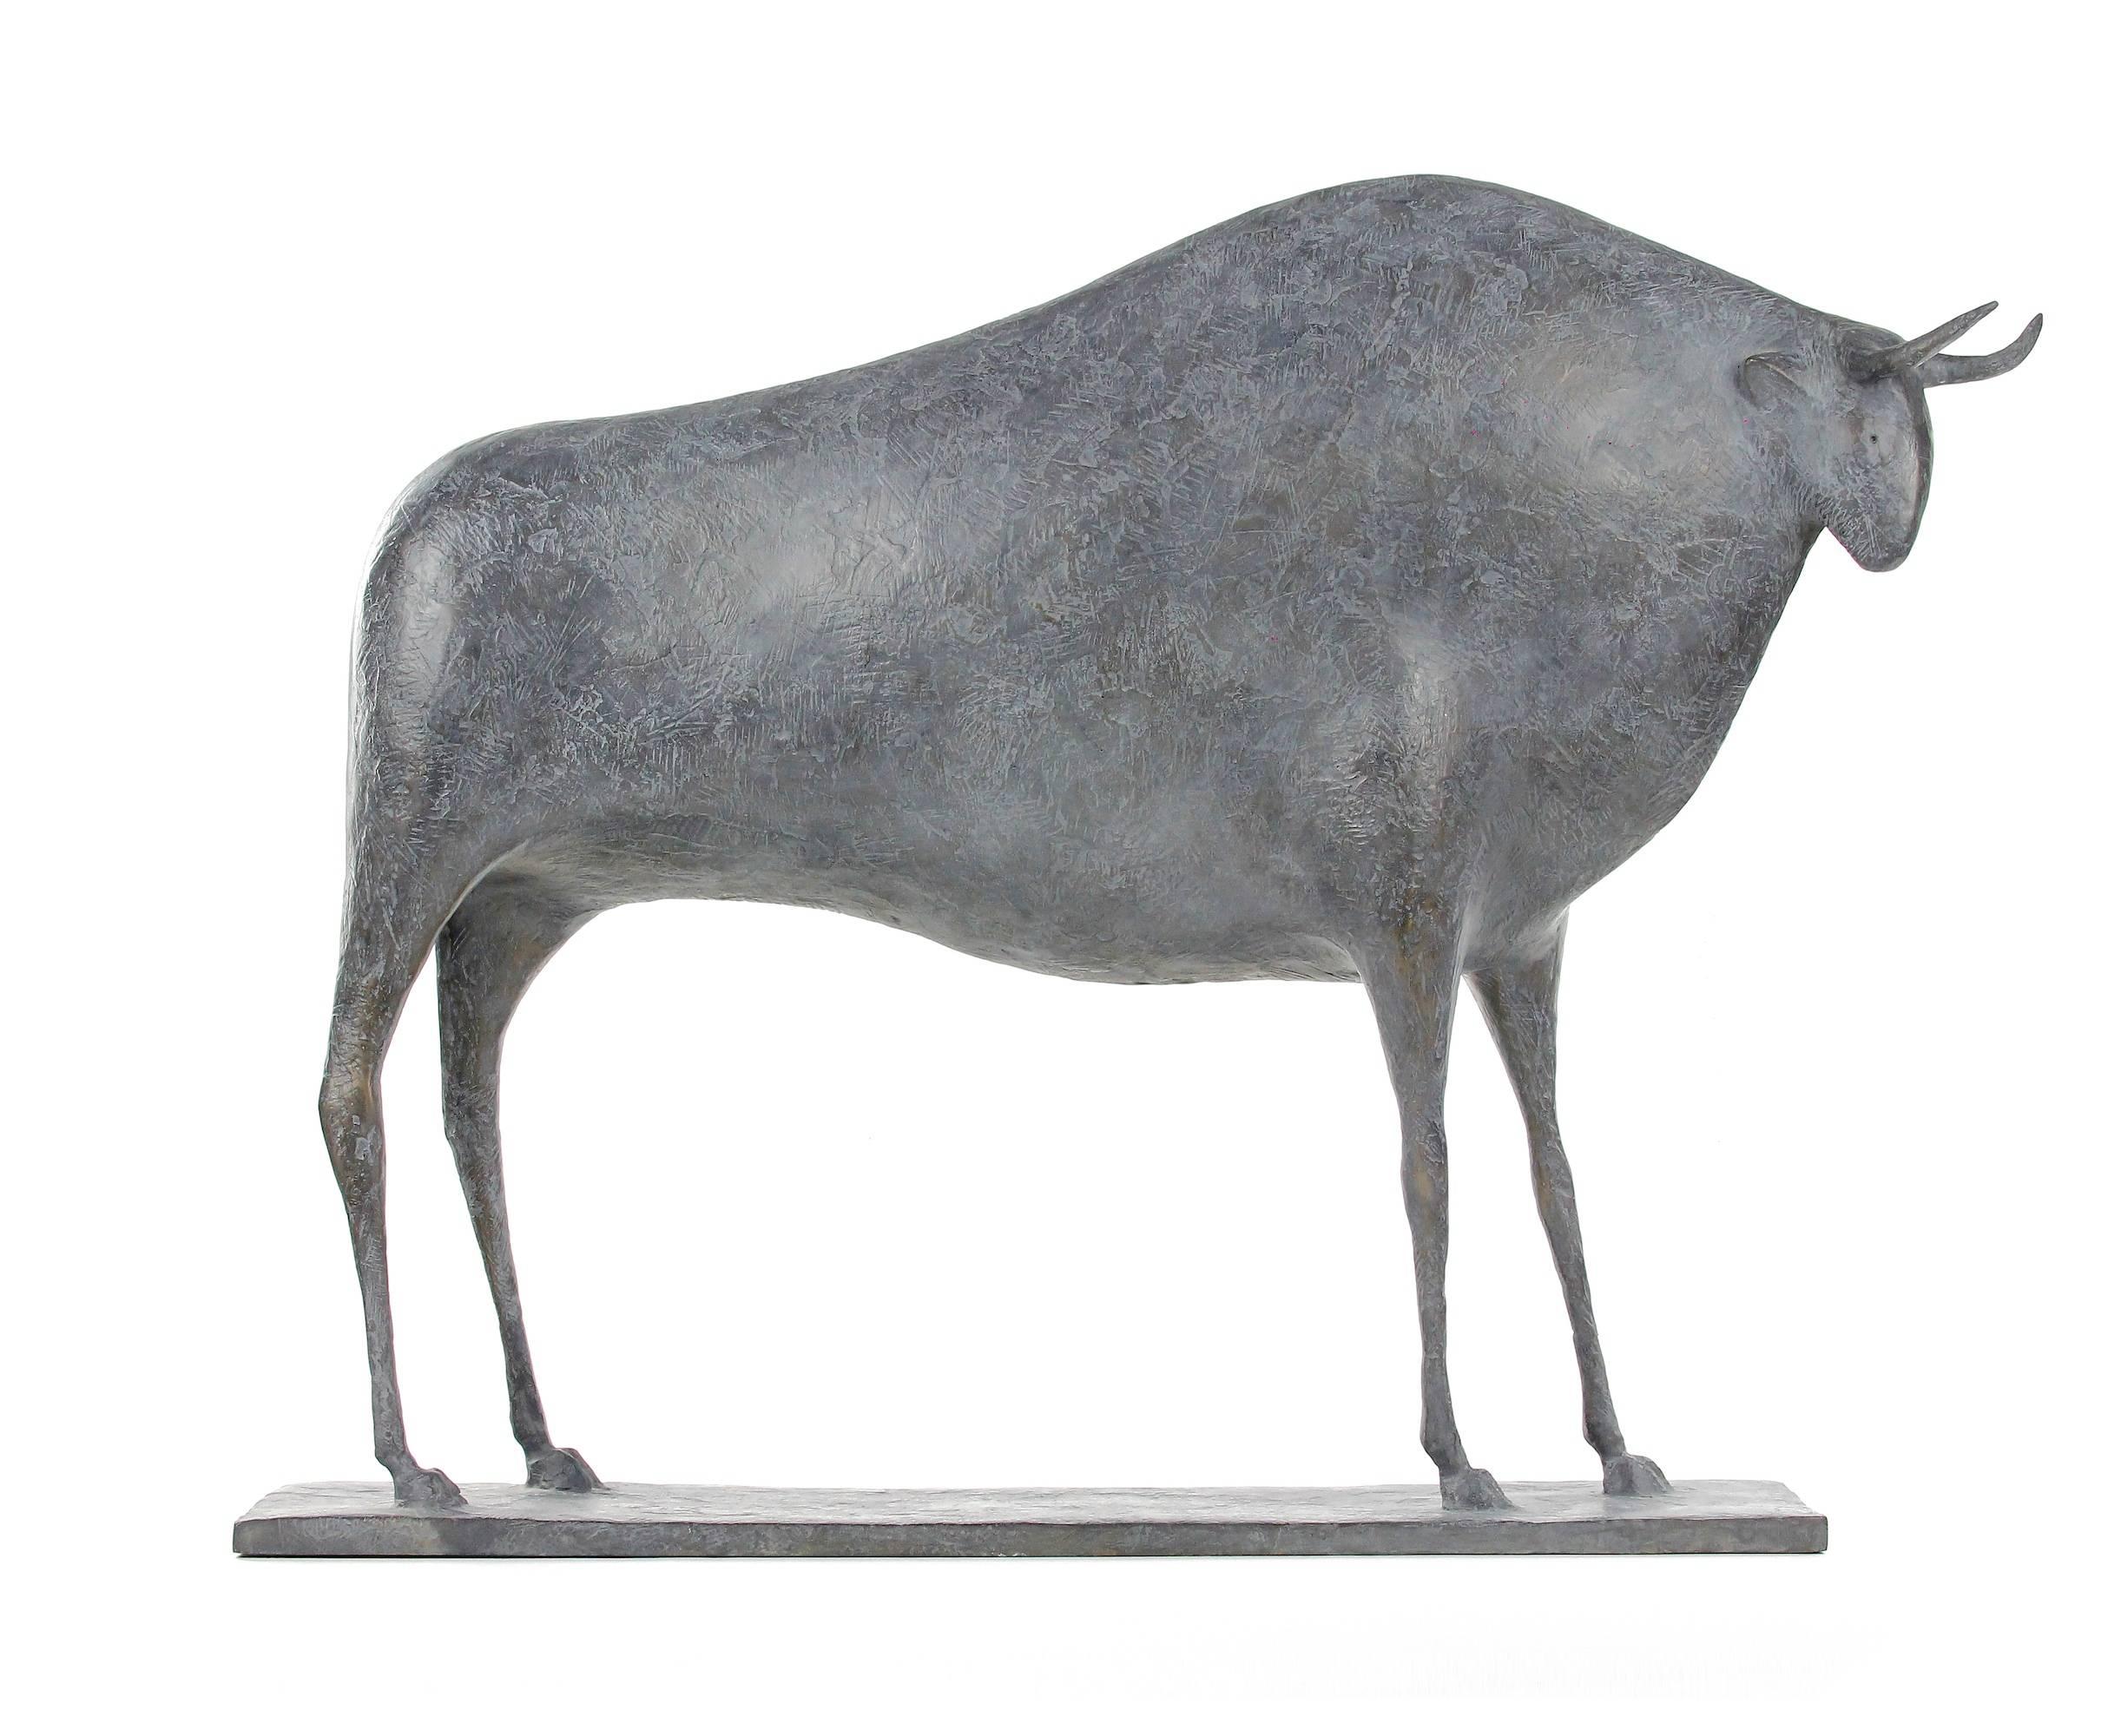 Bull V (Taureau V, 2014) is a bronze sculpture by French contemporary artist Pierre Yermia
57 cm × 70 cm × 20 cm. Limited-edition of 8 copies and 4 artist's proofs. Each copy is signed and numbered.
"The bull is the only masculine animal in my